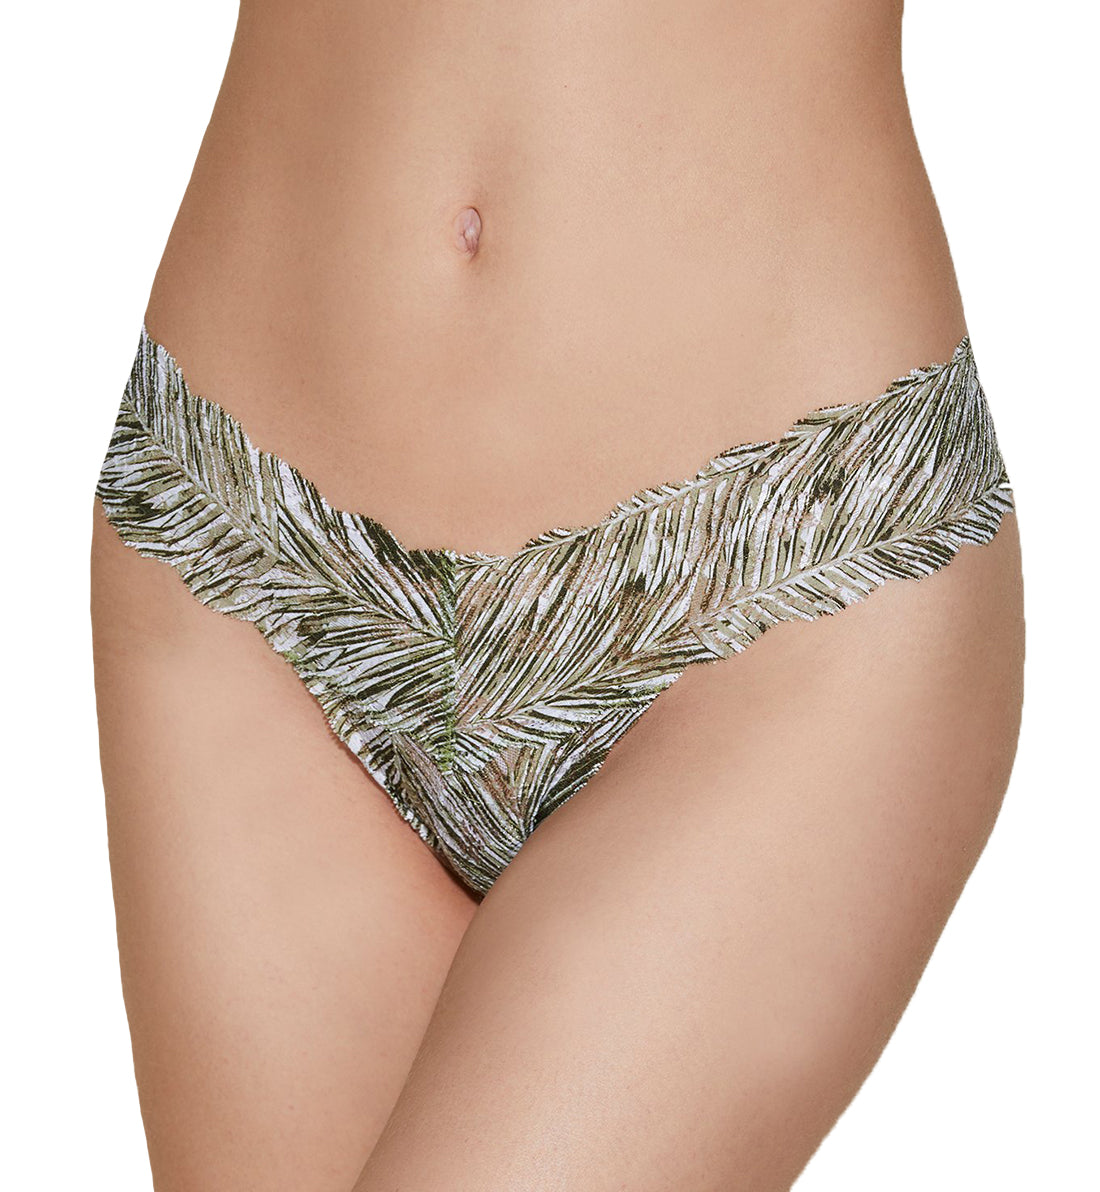 Cosabella Never Say Never Printed Cutie Thong (NEVEP0321),Palm Aloe - Palm Aloe,One Size